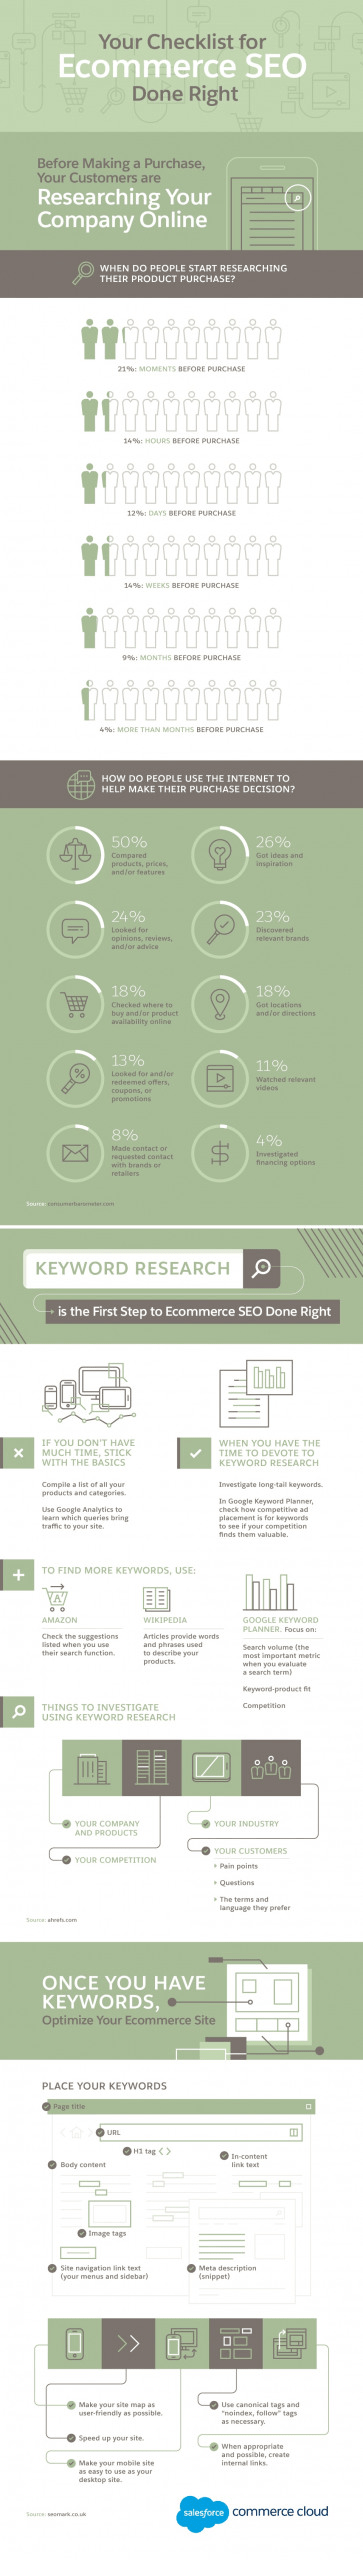 your-checklist-for-ecommerce-seo-done-right-embed-220PbB-scaled.jpg